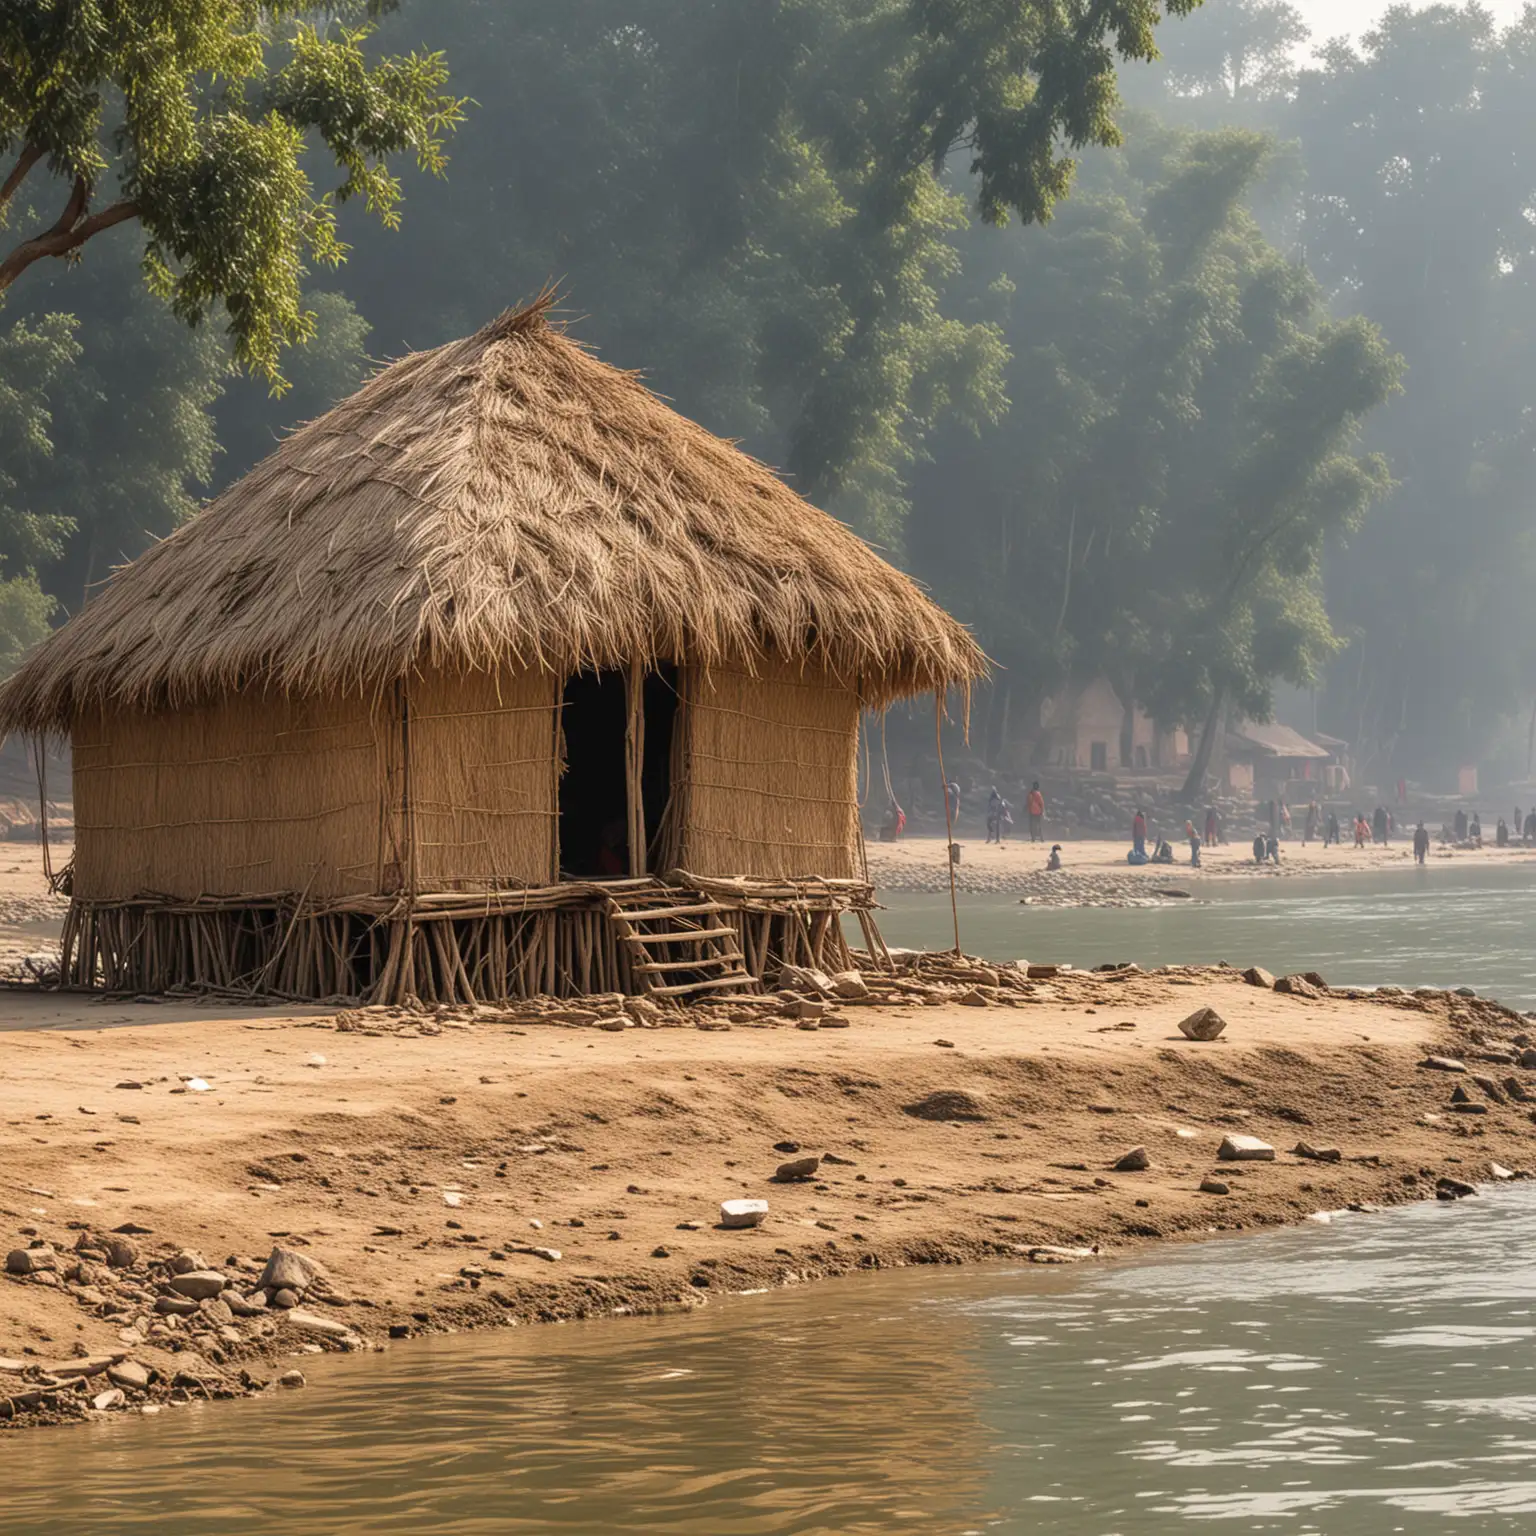 Traditional Straw Hut by the Ganges River